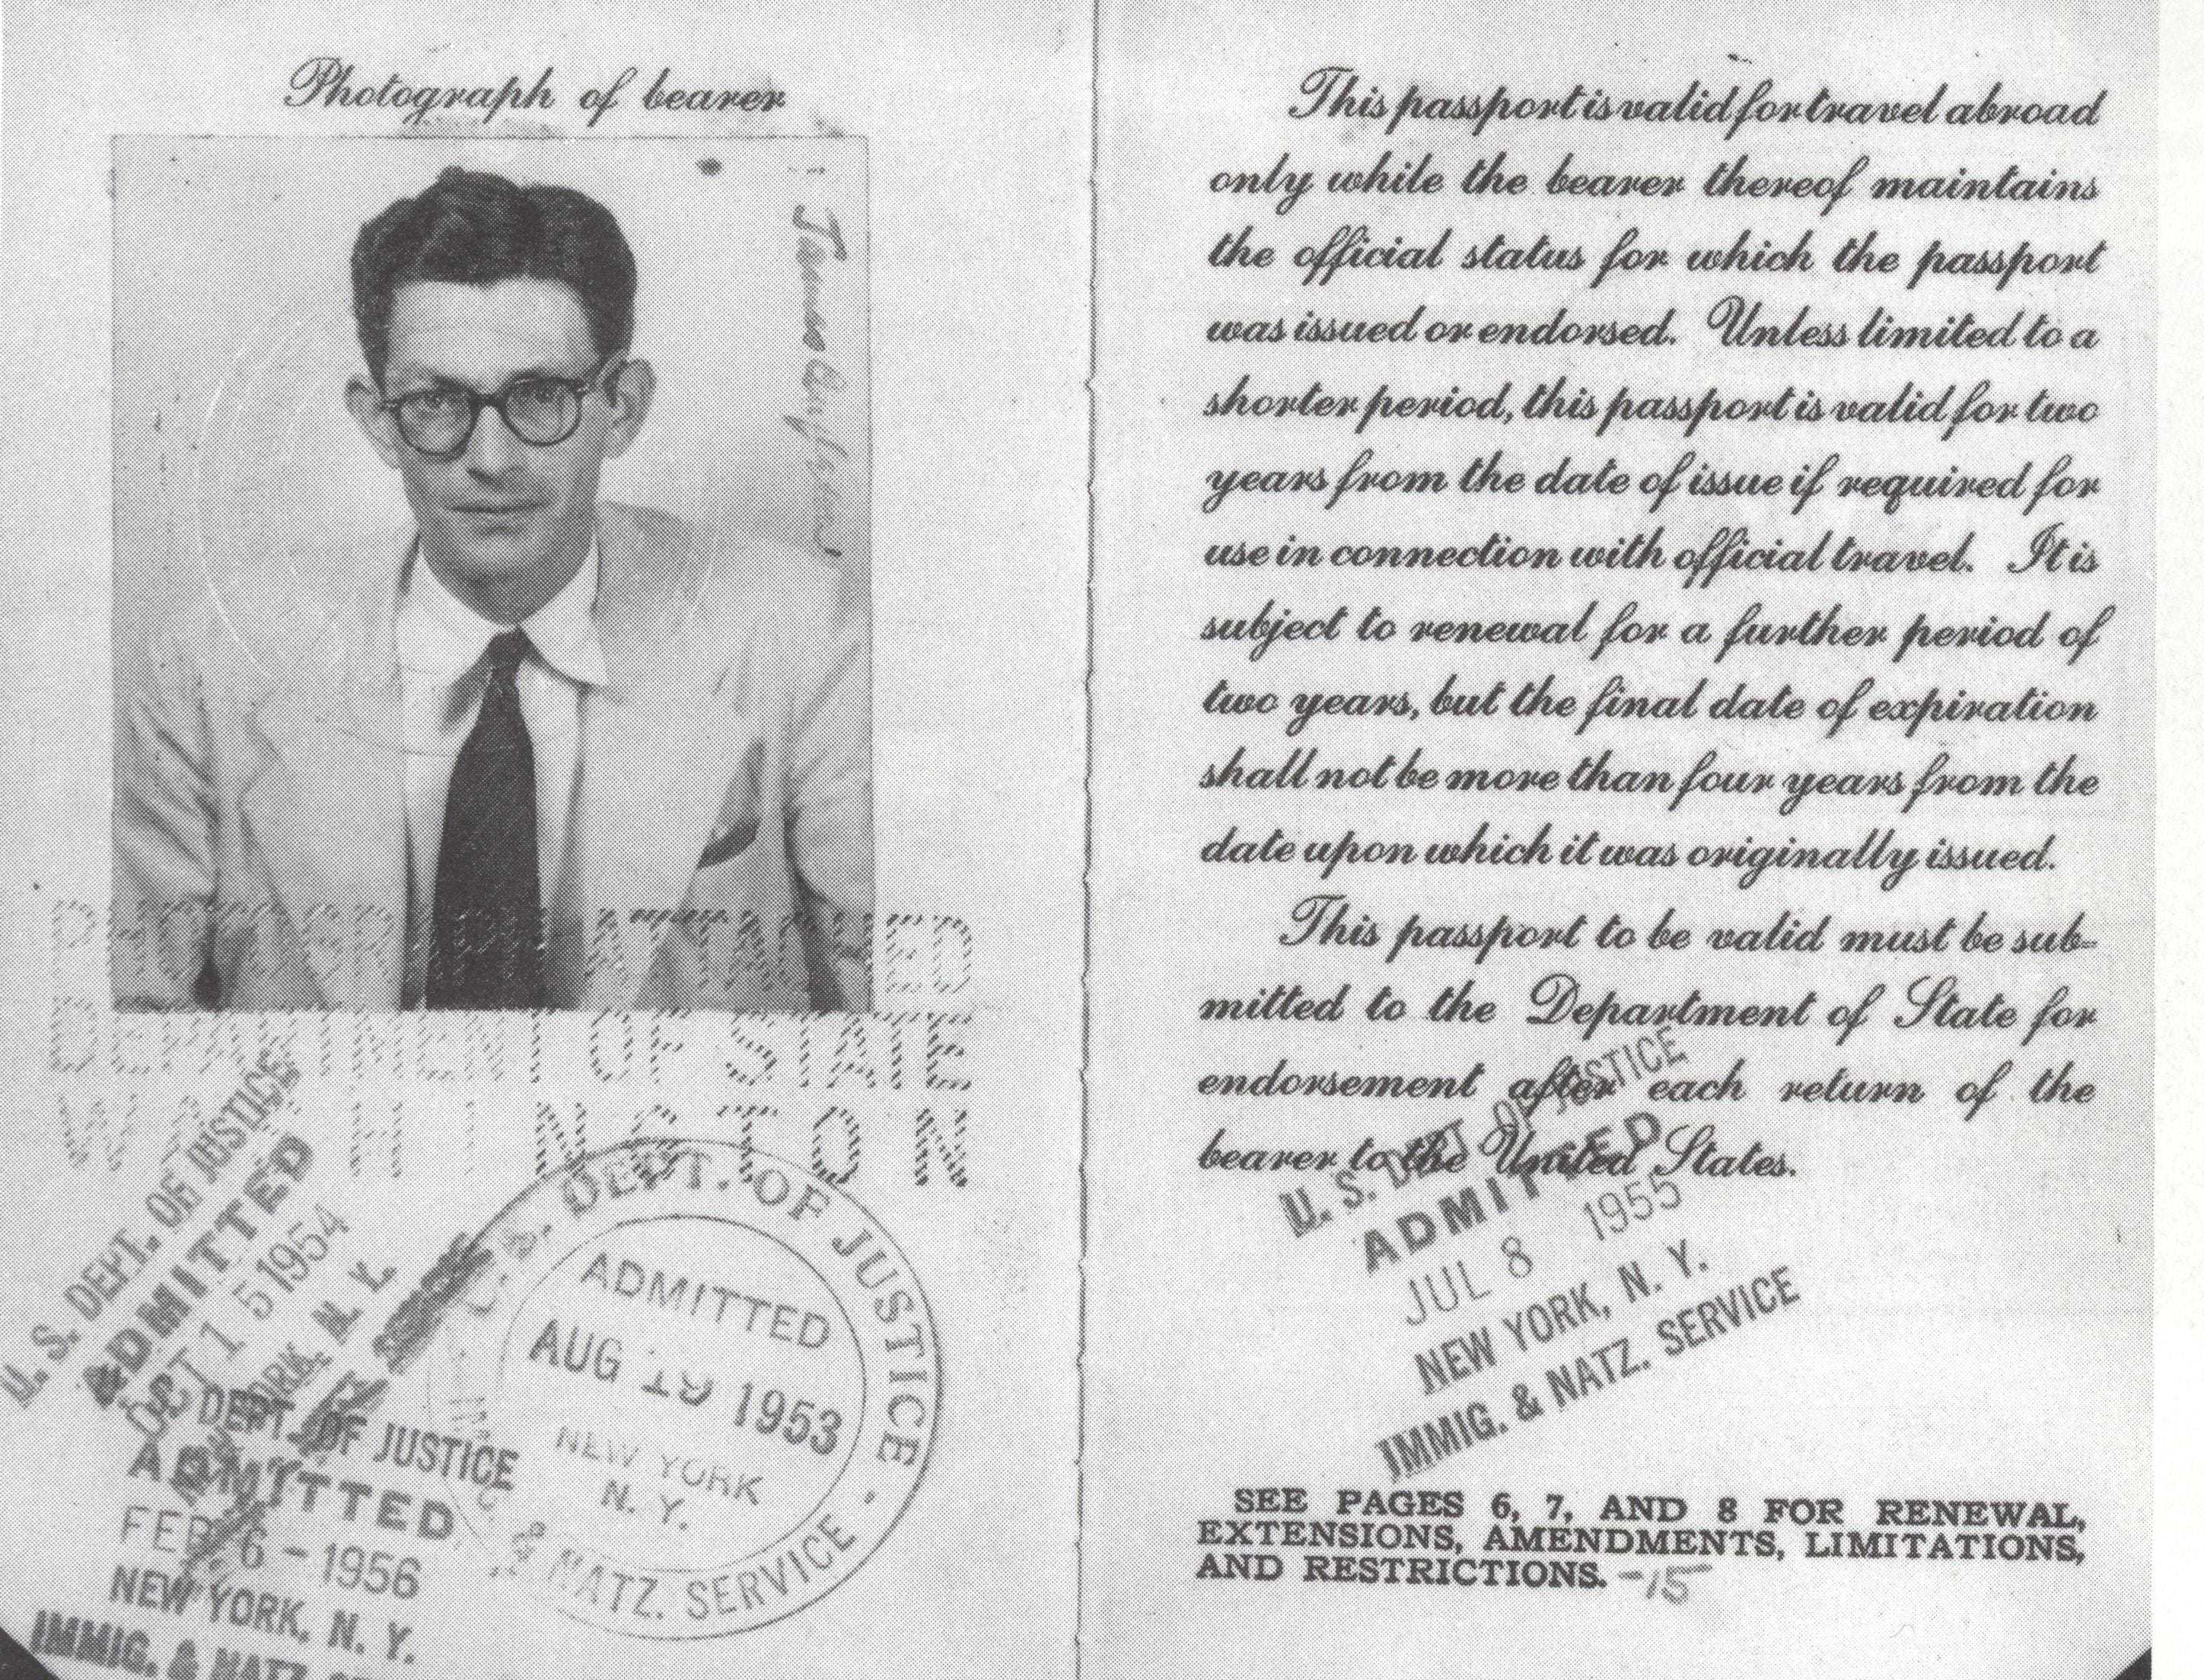 James Angleton's passport with his picture on the left side and his information on the right.